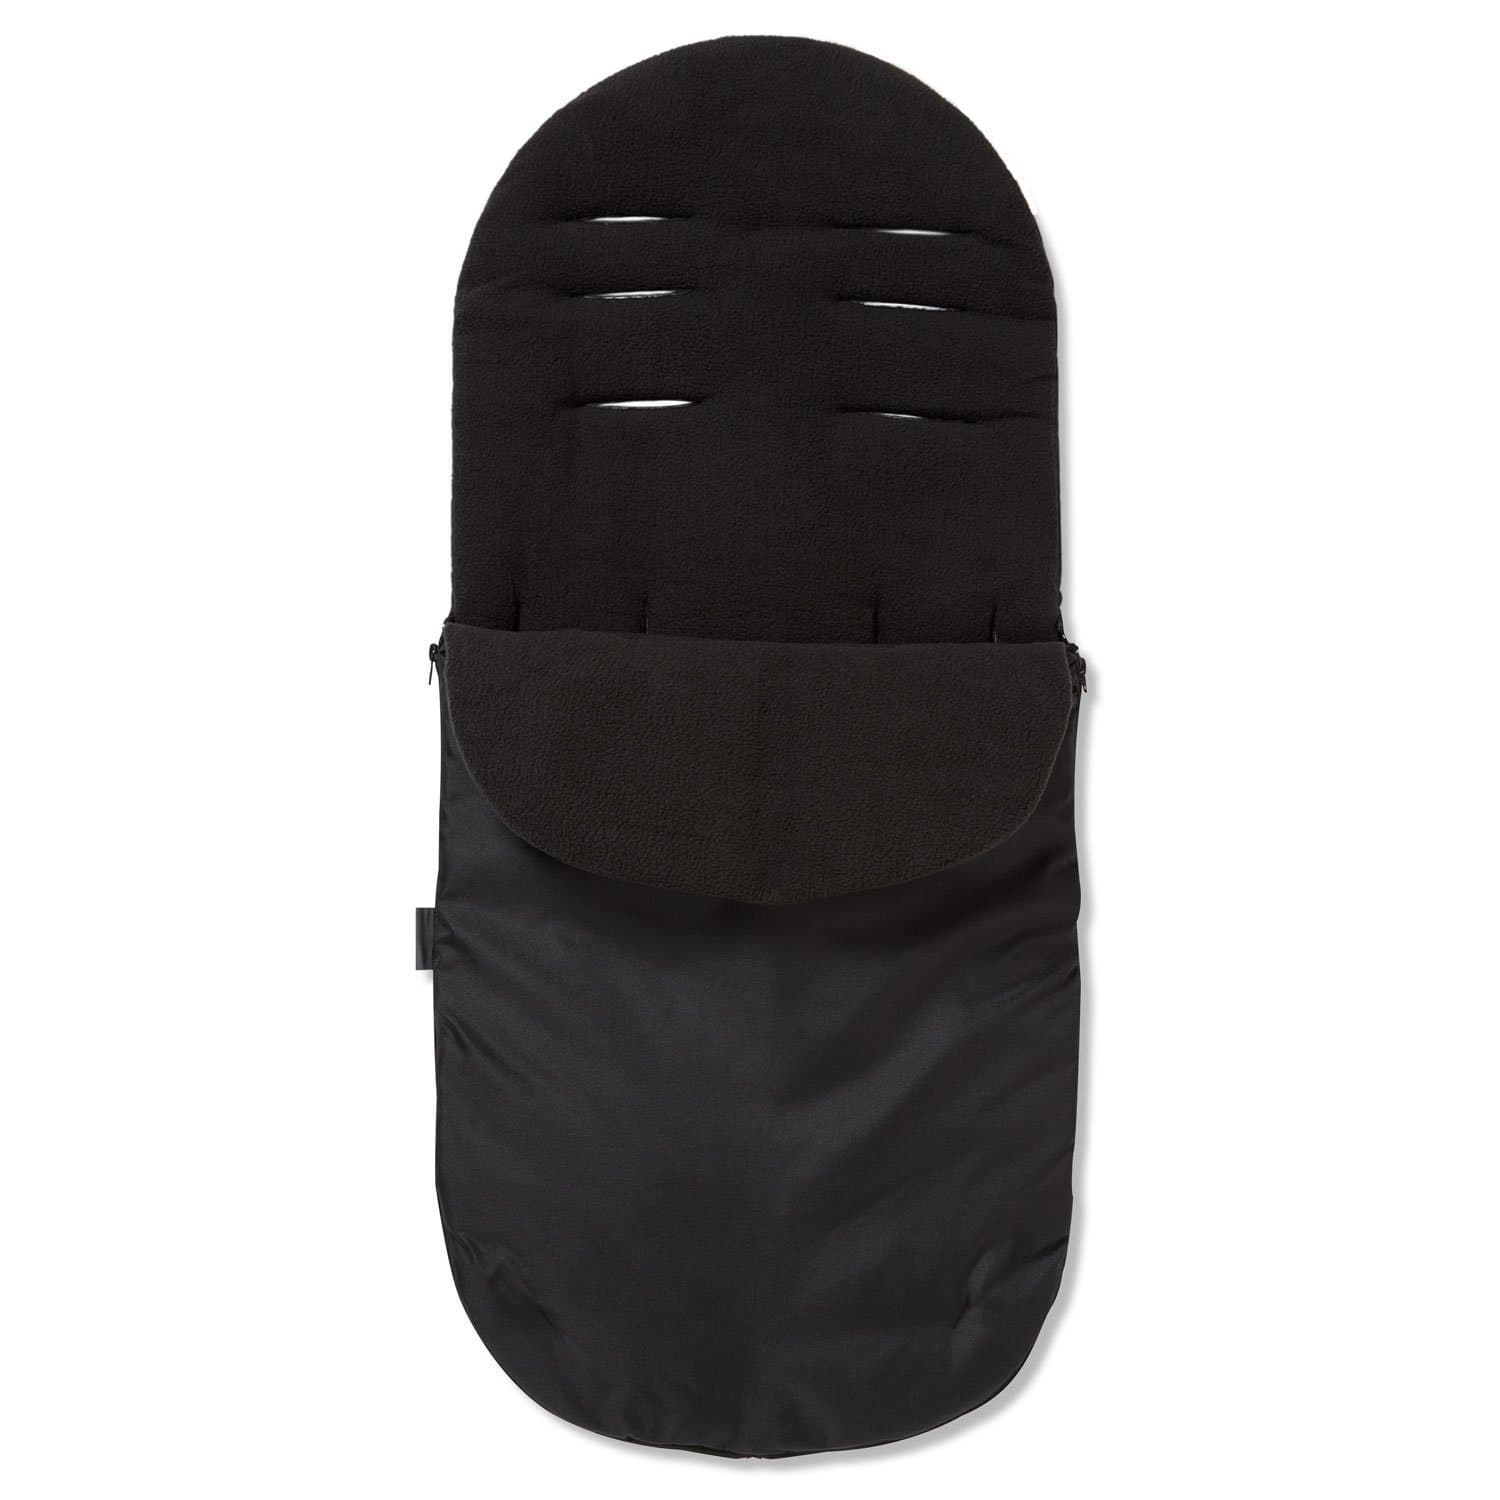 Footmuff / Cosy Toes Compatible with Jane - Black / Fits All Models | For Your Little One